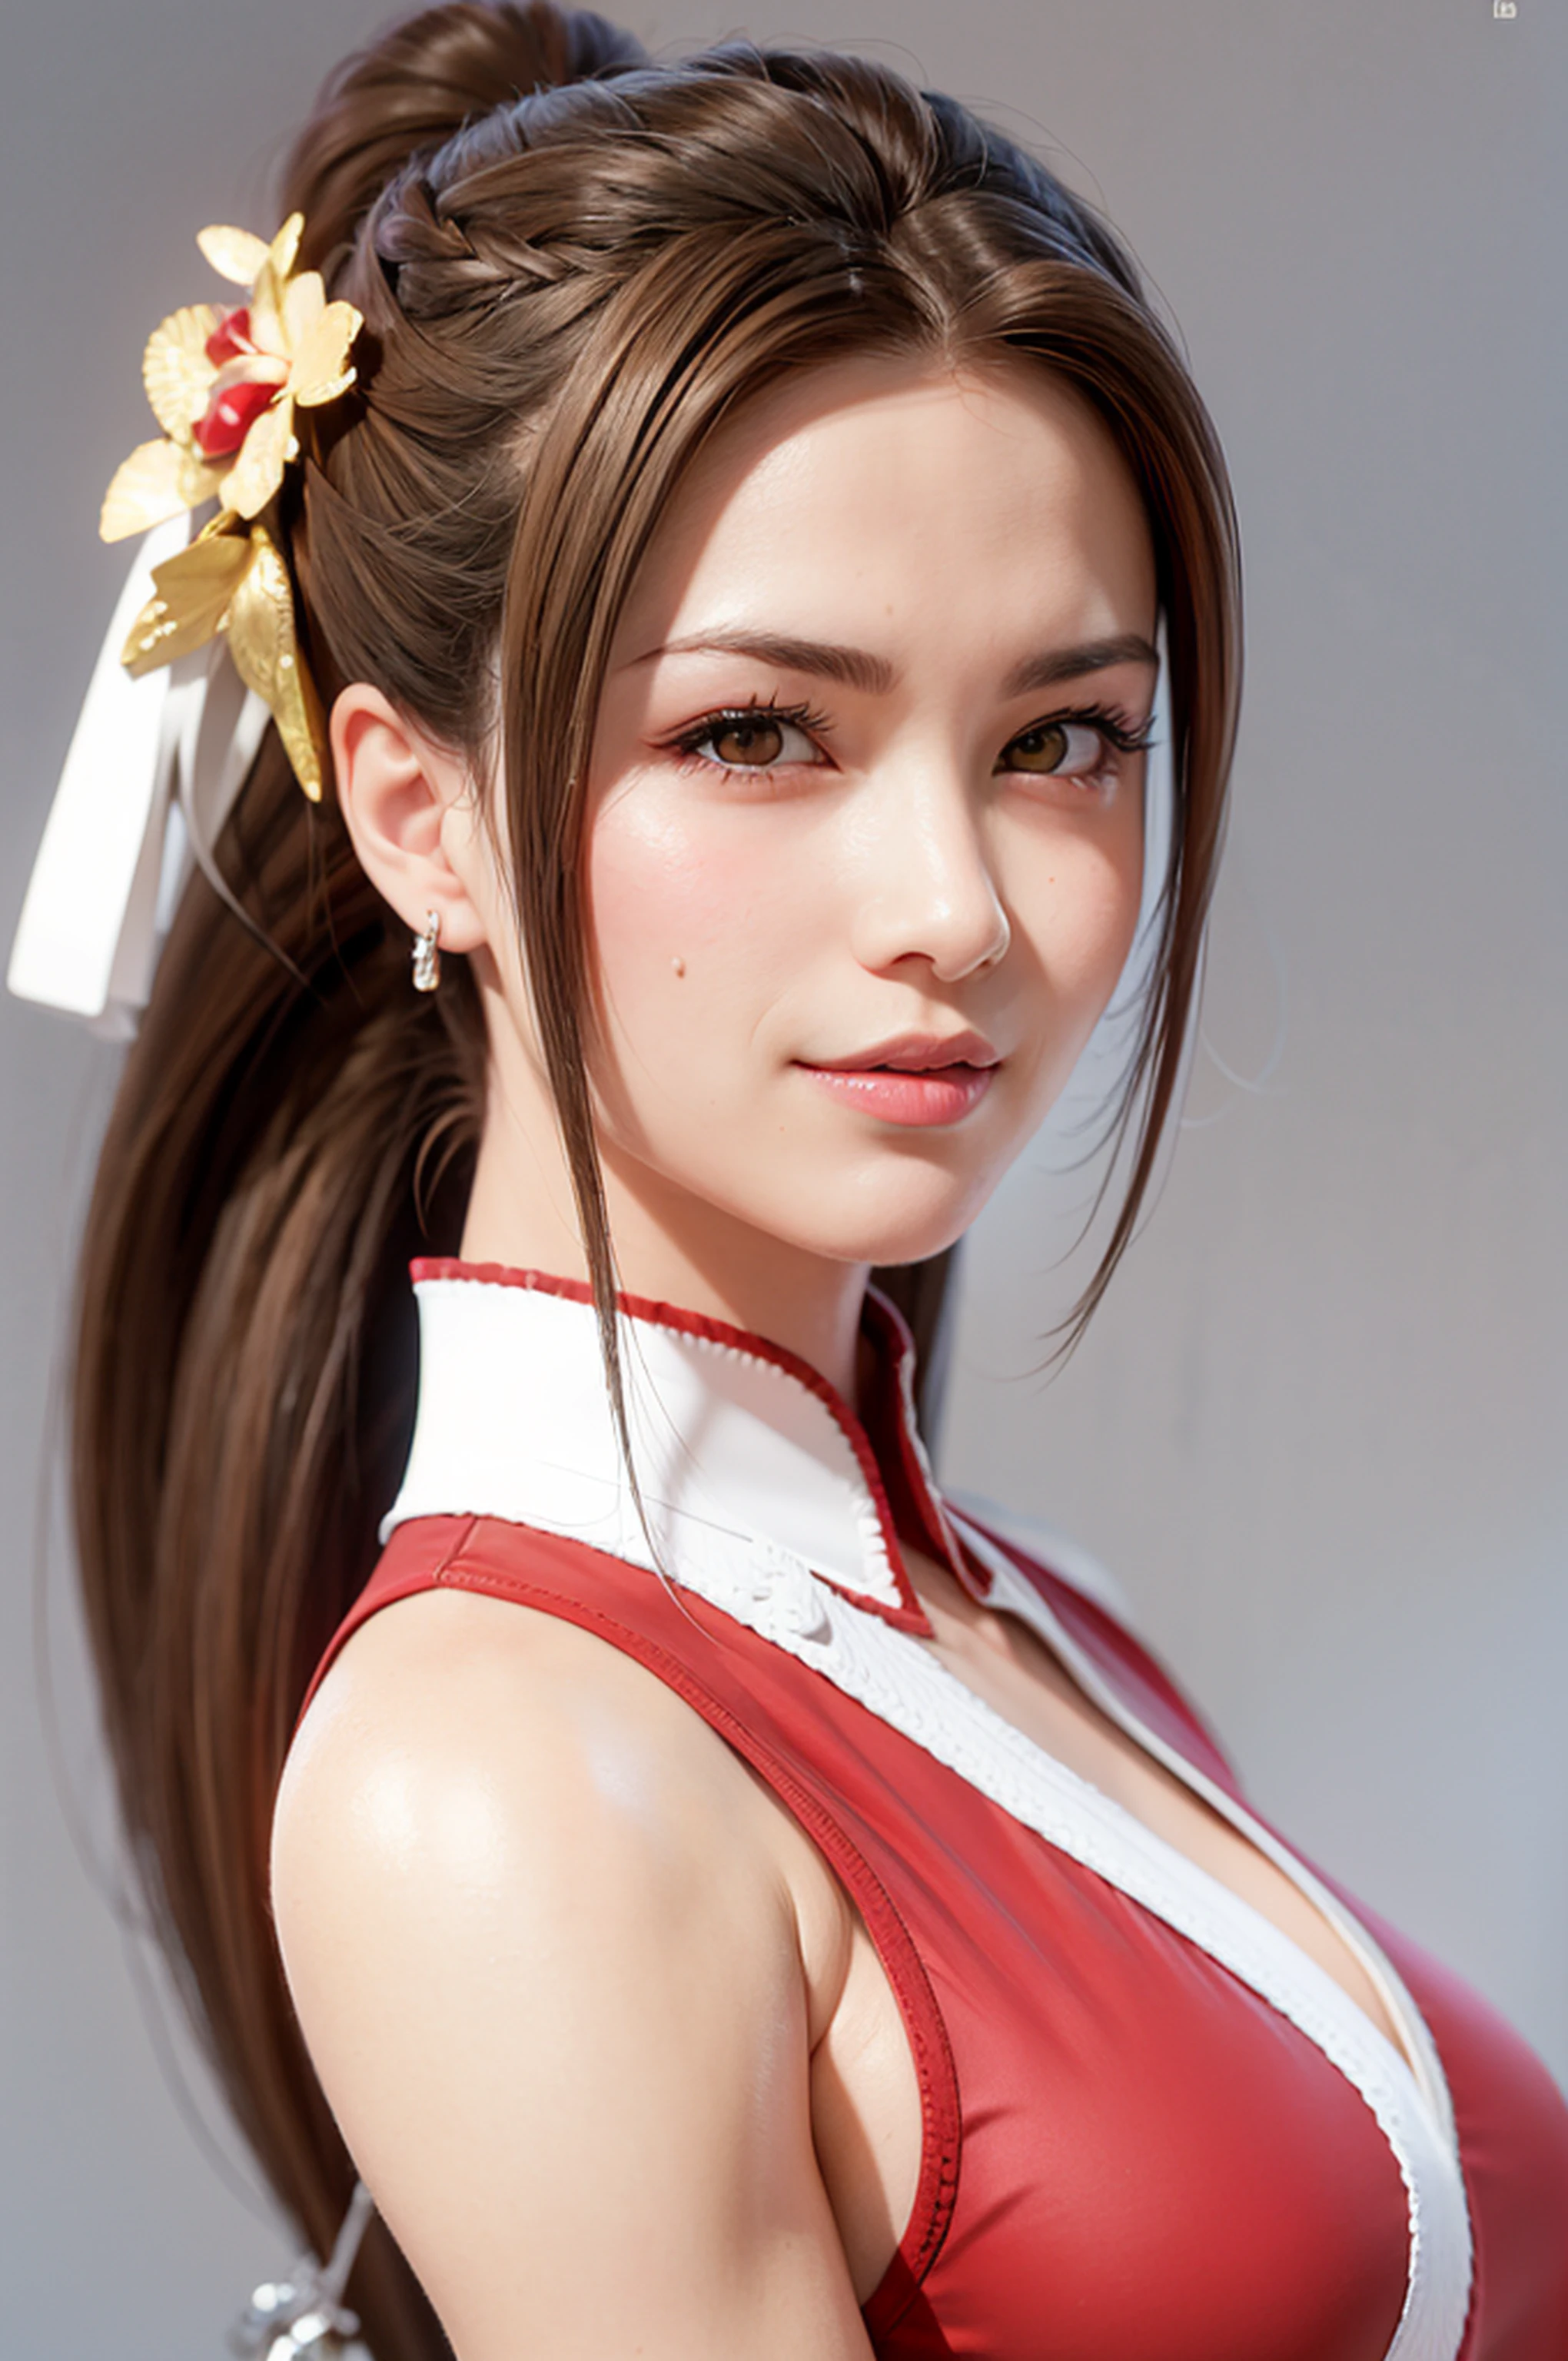 Mai Shiranui, beautiful and calm face. Ivory eyes, small-nose, perfectly arched eyebrows, and minor. She's got her hair tied up in a braid, and a choker bracelet securing the wires. a special shine, as if radiant. Eyelashes are long and beautiful, Long eyelashes, and the eye has a slightly Asian shape. The face is immaculate and wrinkle-free, and appears to be small and attractive. His nose is small and straight, in a perfect shape. Your mouth is small, with lips that are a little thick. Her long brown hair is tied up in a braid, with some loose strands around the forehead. Your face is lit up by the sun, that's downloading, And you've got a seductive twinkle in your eye. She has fair skin, but a very beautiful shine, And it's shining with the sun. The skin appears to be well cared for, and it looks soft, as if it were silky. has an oval face, with round and slightly red cheeks. Your chin is straight and attractive, And you've got a slight flush on your cheeks. Your face has a perfect fit, And you've got two nice, well-rounded jaws. Your eyes stand out, And his smiley expression is very pleasant.